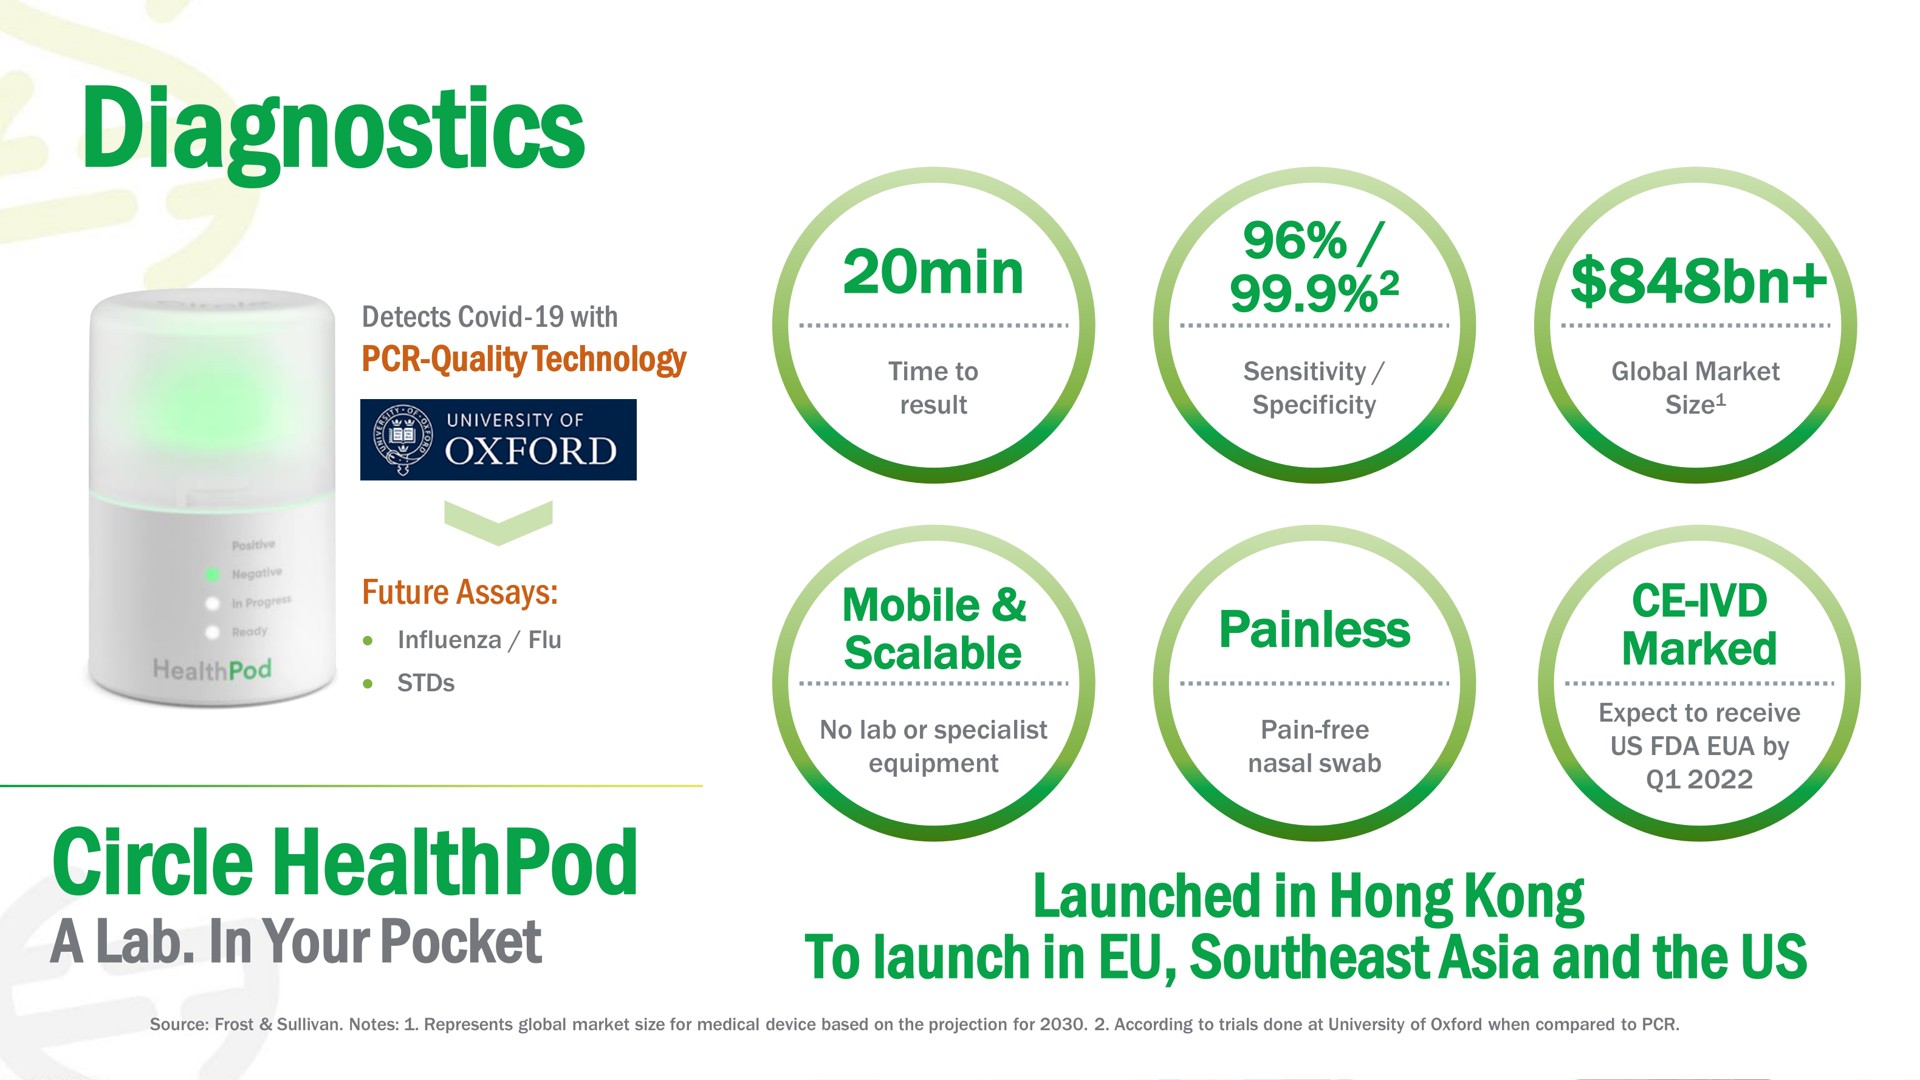 diagnostics min circle a lab in your pocket painless launched in hong to launch in southeast and the us | Prenetics